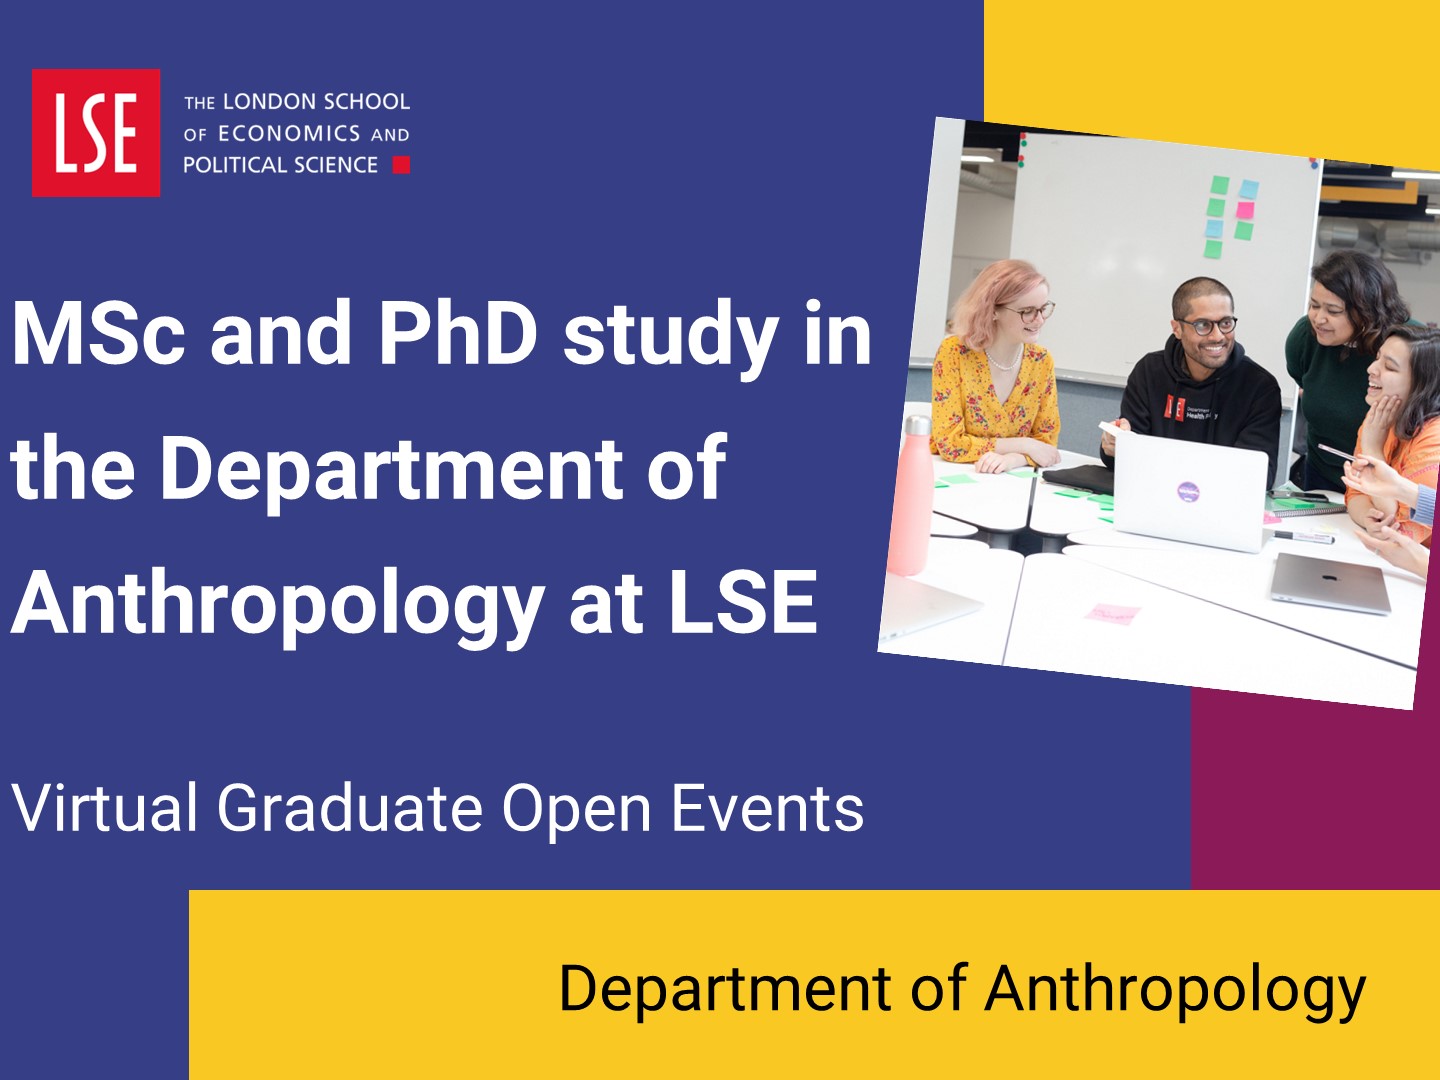 Introduction to MSc and PhD study in Anthropology